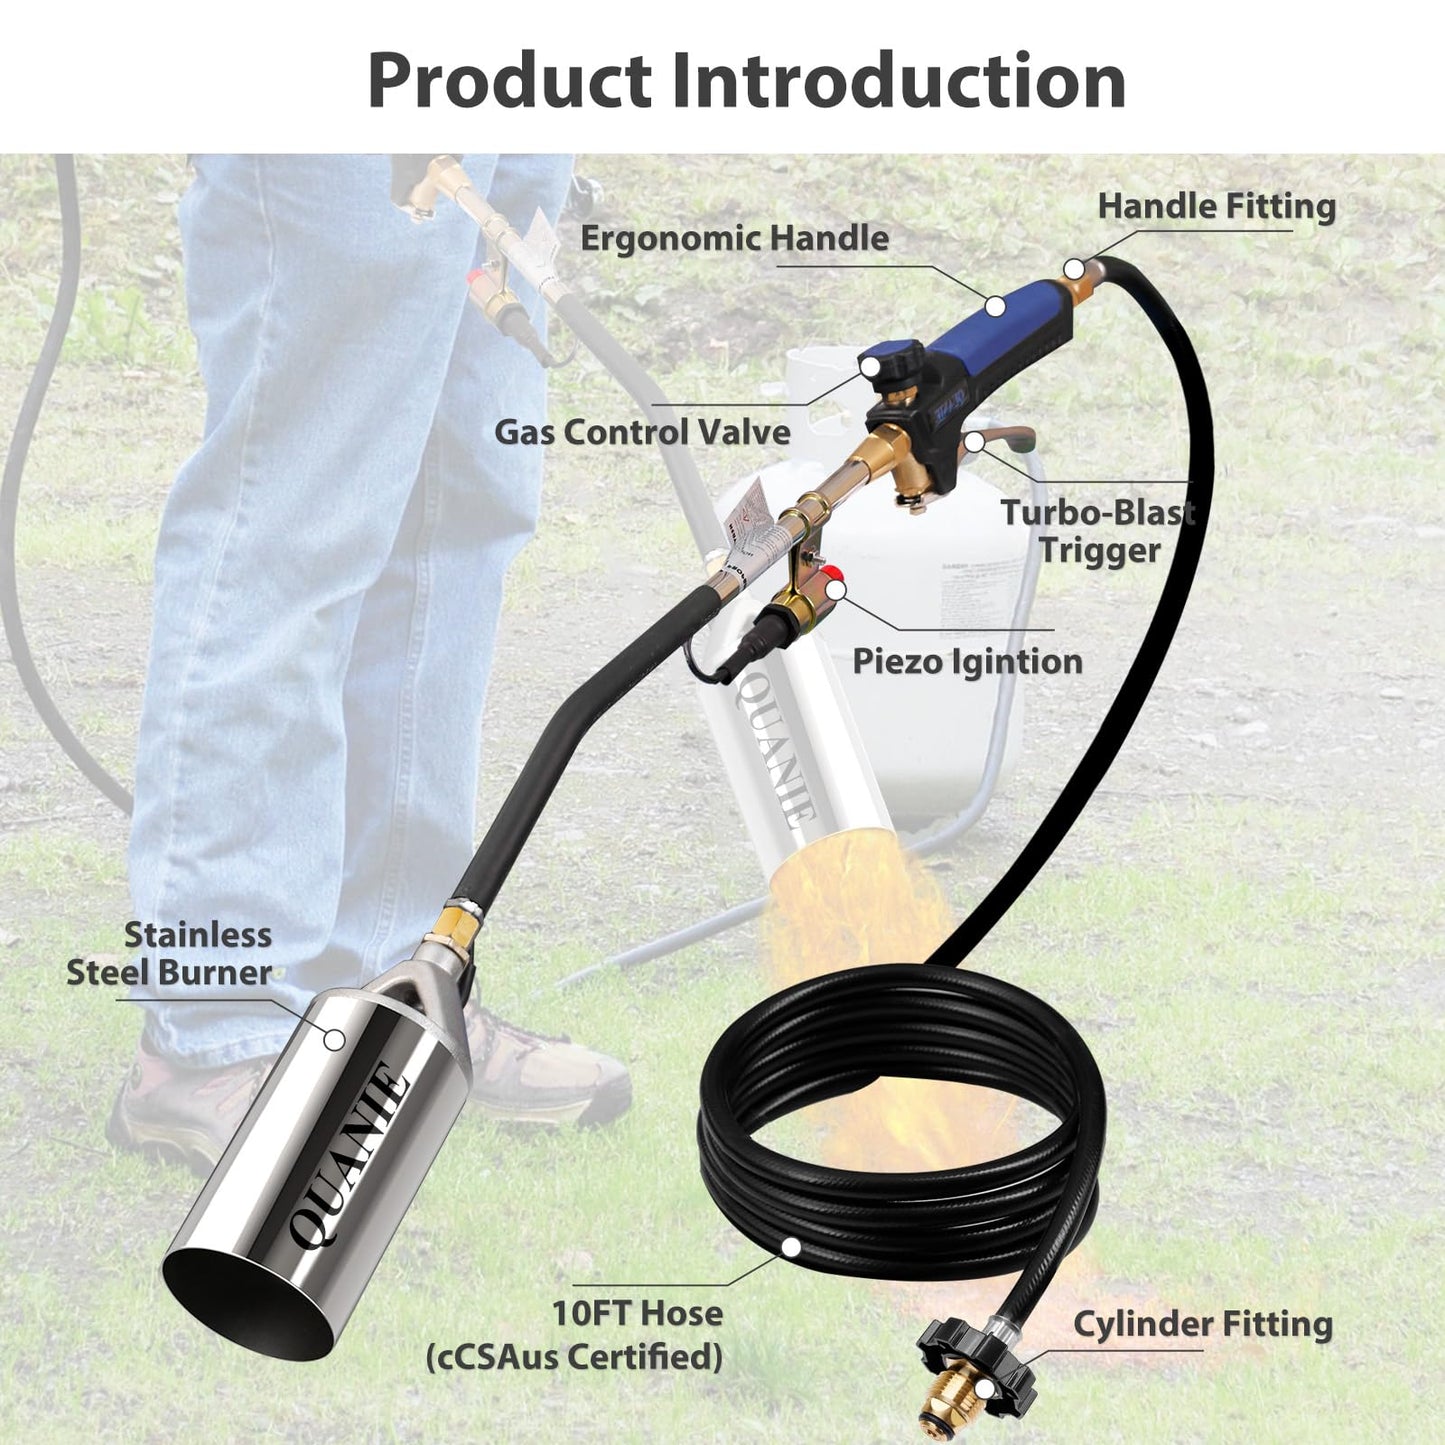 Propane Torch Burner Weed Torch High Output 1,200,000 BTU with 10FT Hose,Heavy Duty Blow Torch with Flame Control and Turbo Trigger Push Button Igniter,Flamethrower for Garden Wood Ice Snow Road (Blue